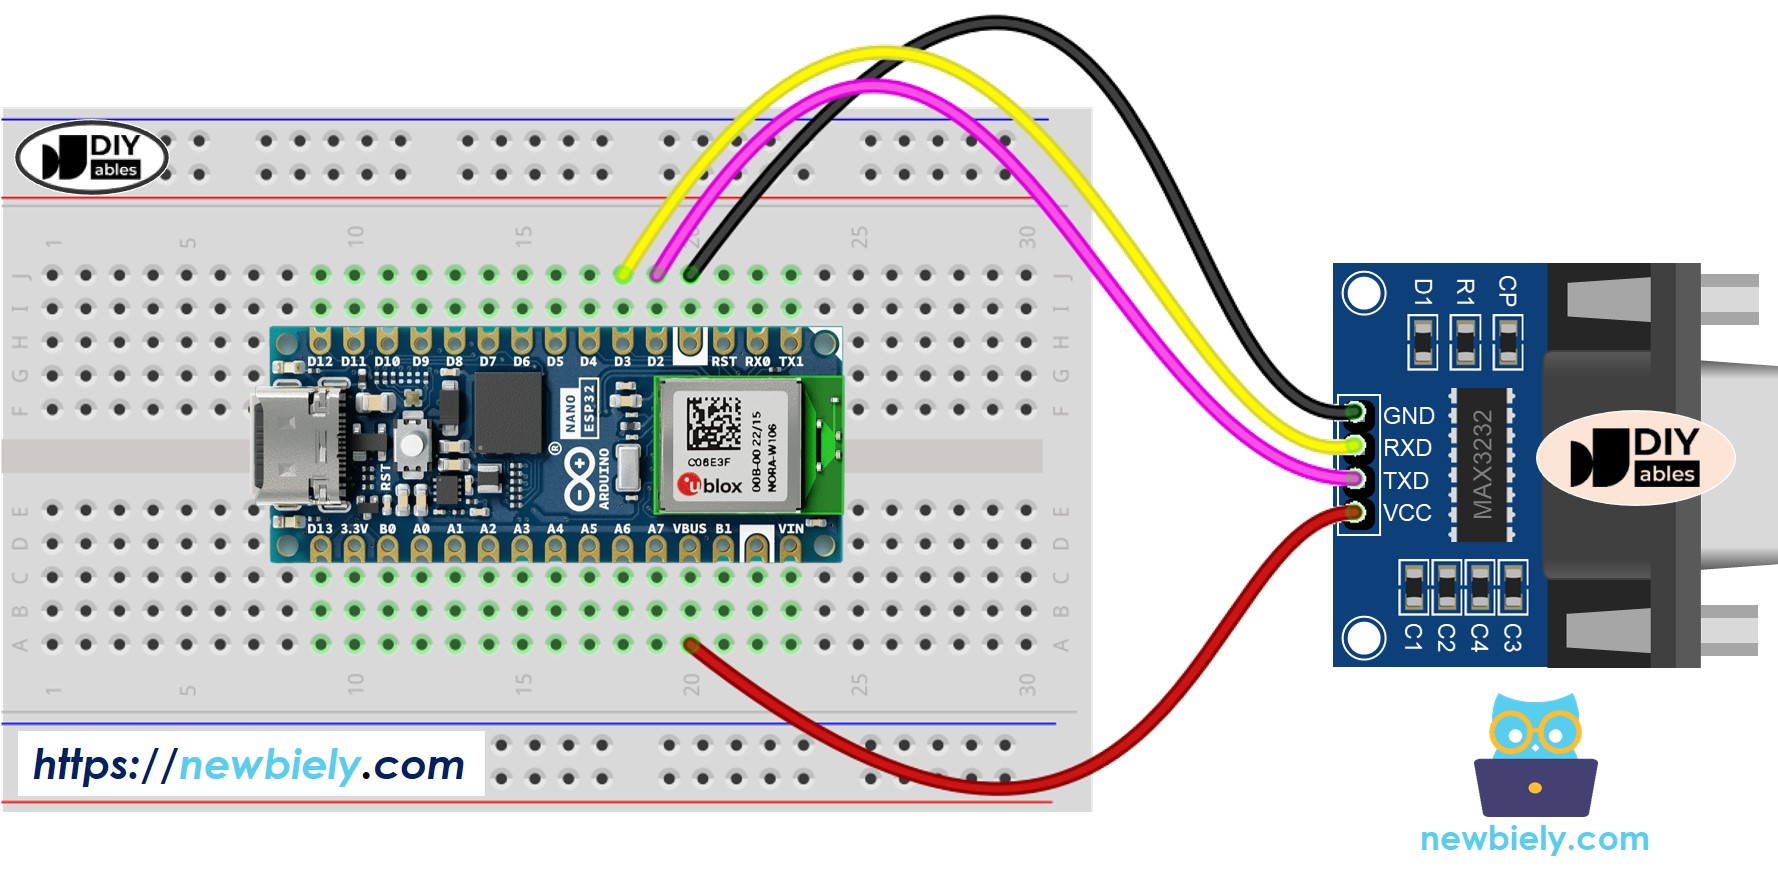 The wiring diagram between Arduino Nano ESP32 and TTL to RS232